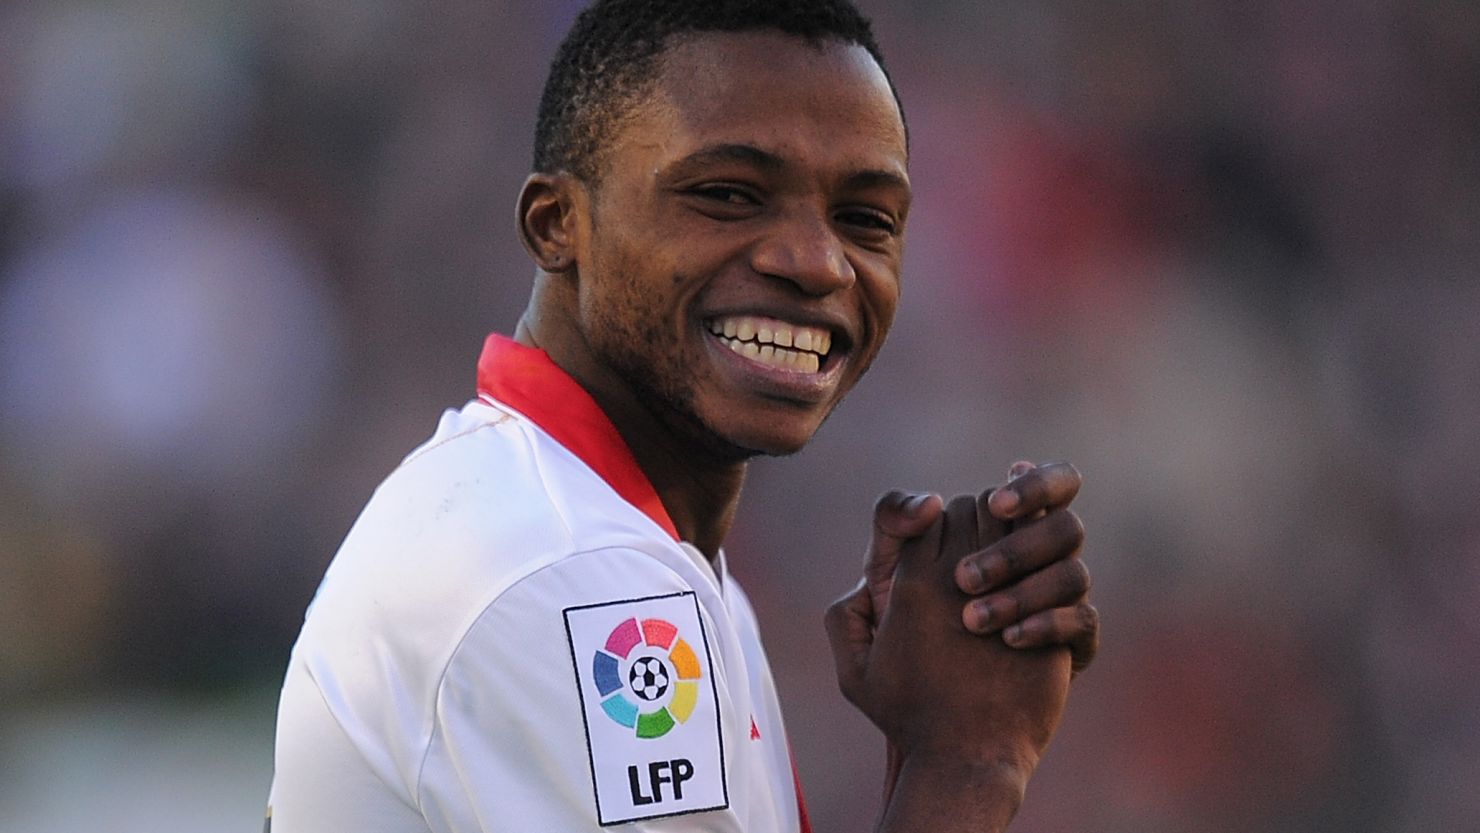 Lass Bangoura is a regular for Rayo Vallecano in Spain's La Liga competition as well as a Guinea international.